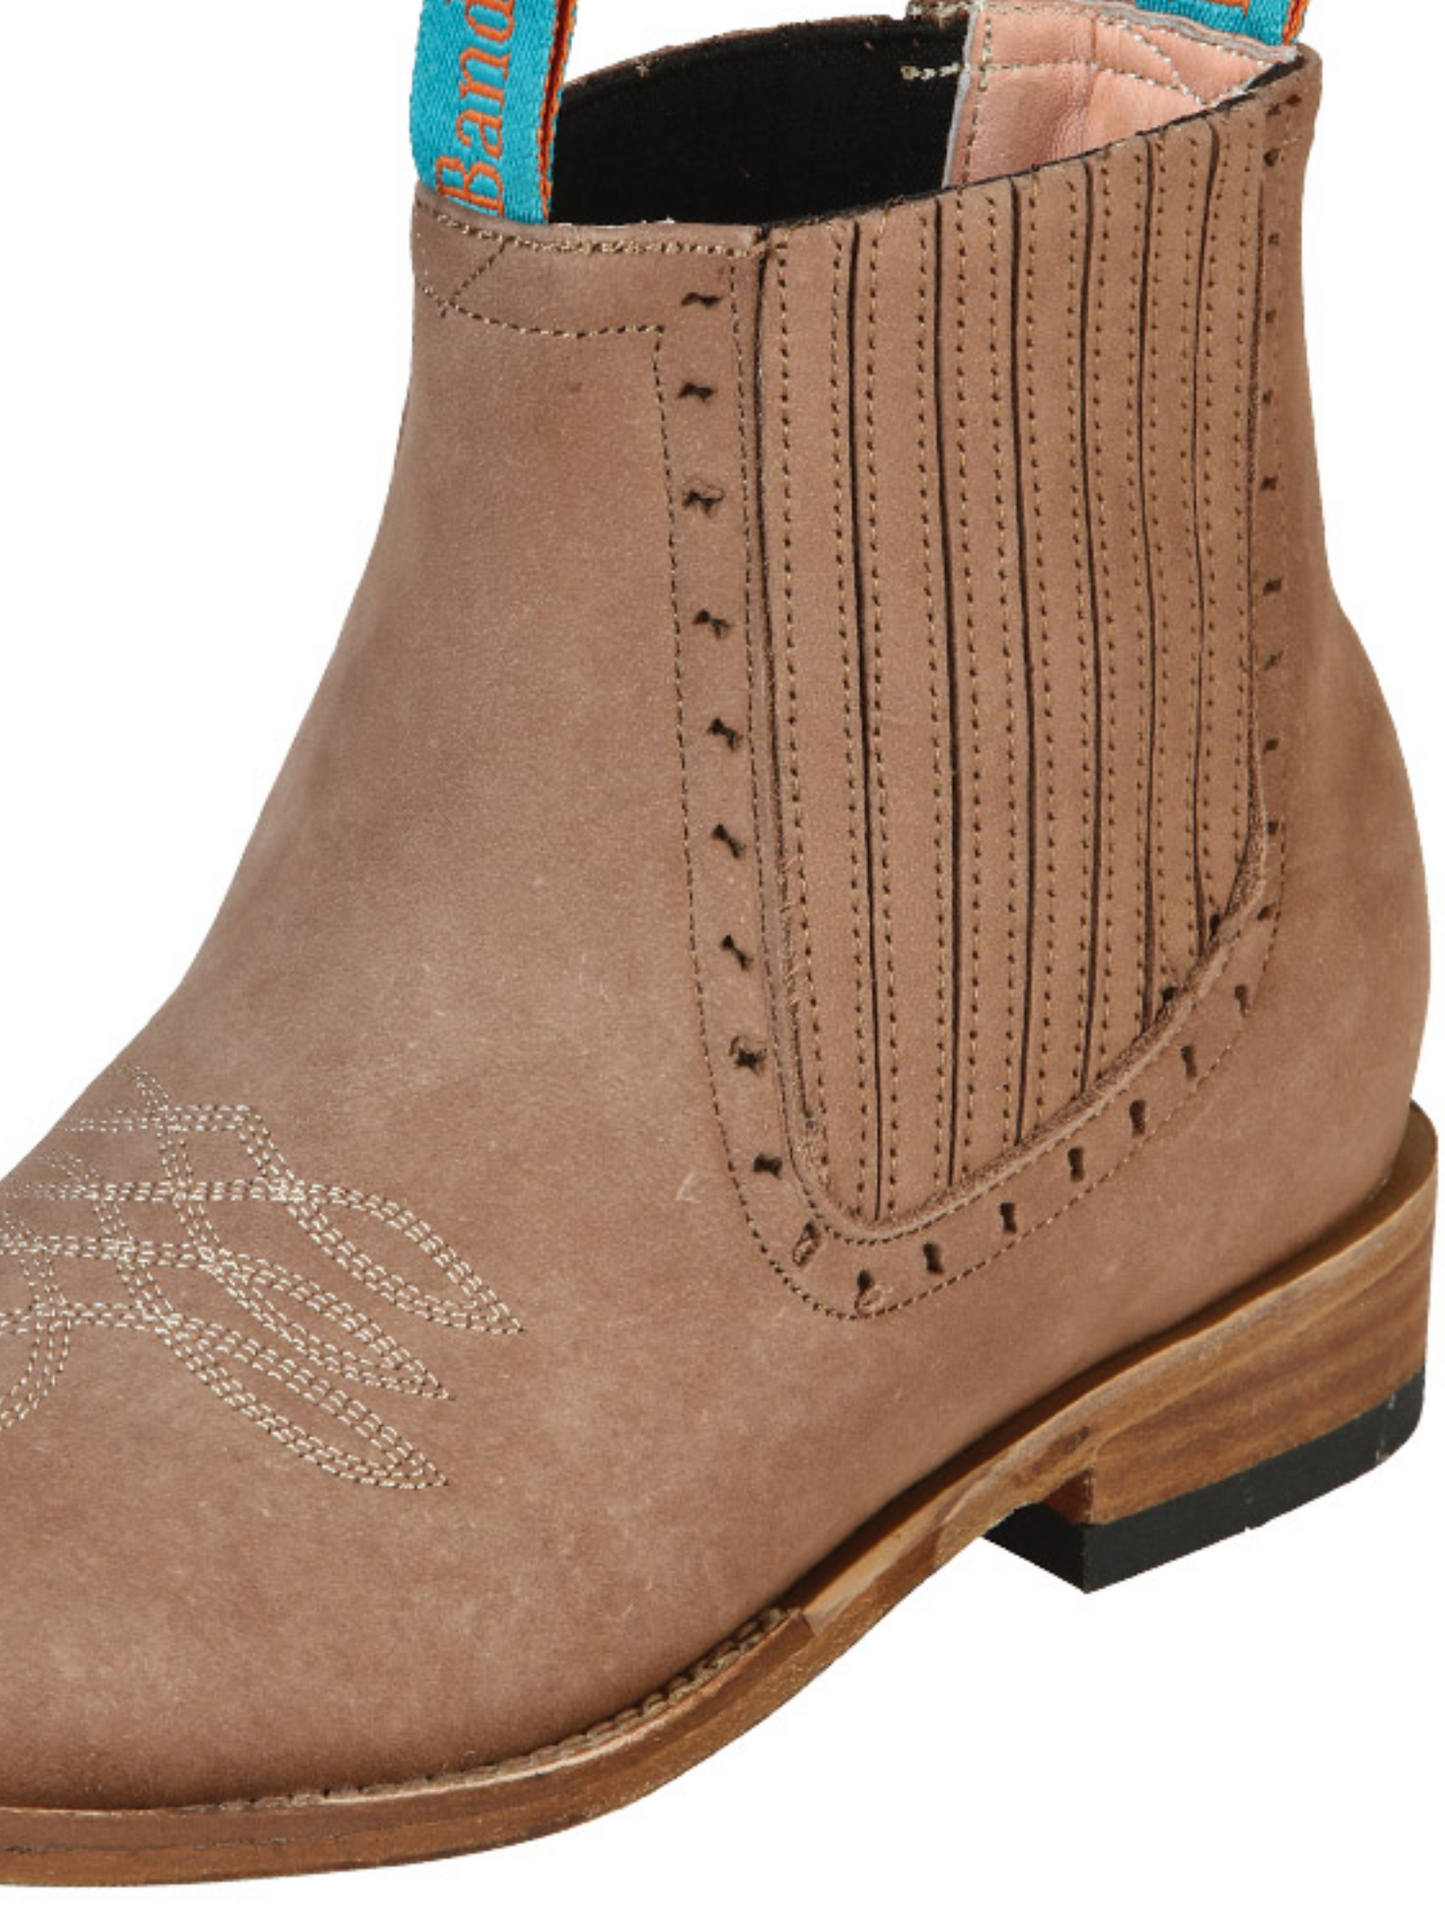 Classic Nubuck Leather Rodeo Cowboy Ankle Boots for Women 'La Barca' - ID: 126665 Western Ankle Boots La Barca